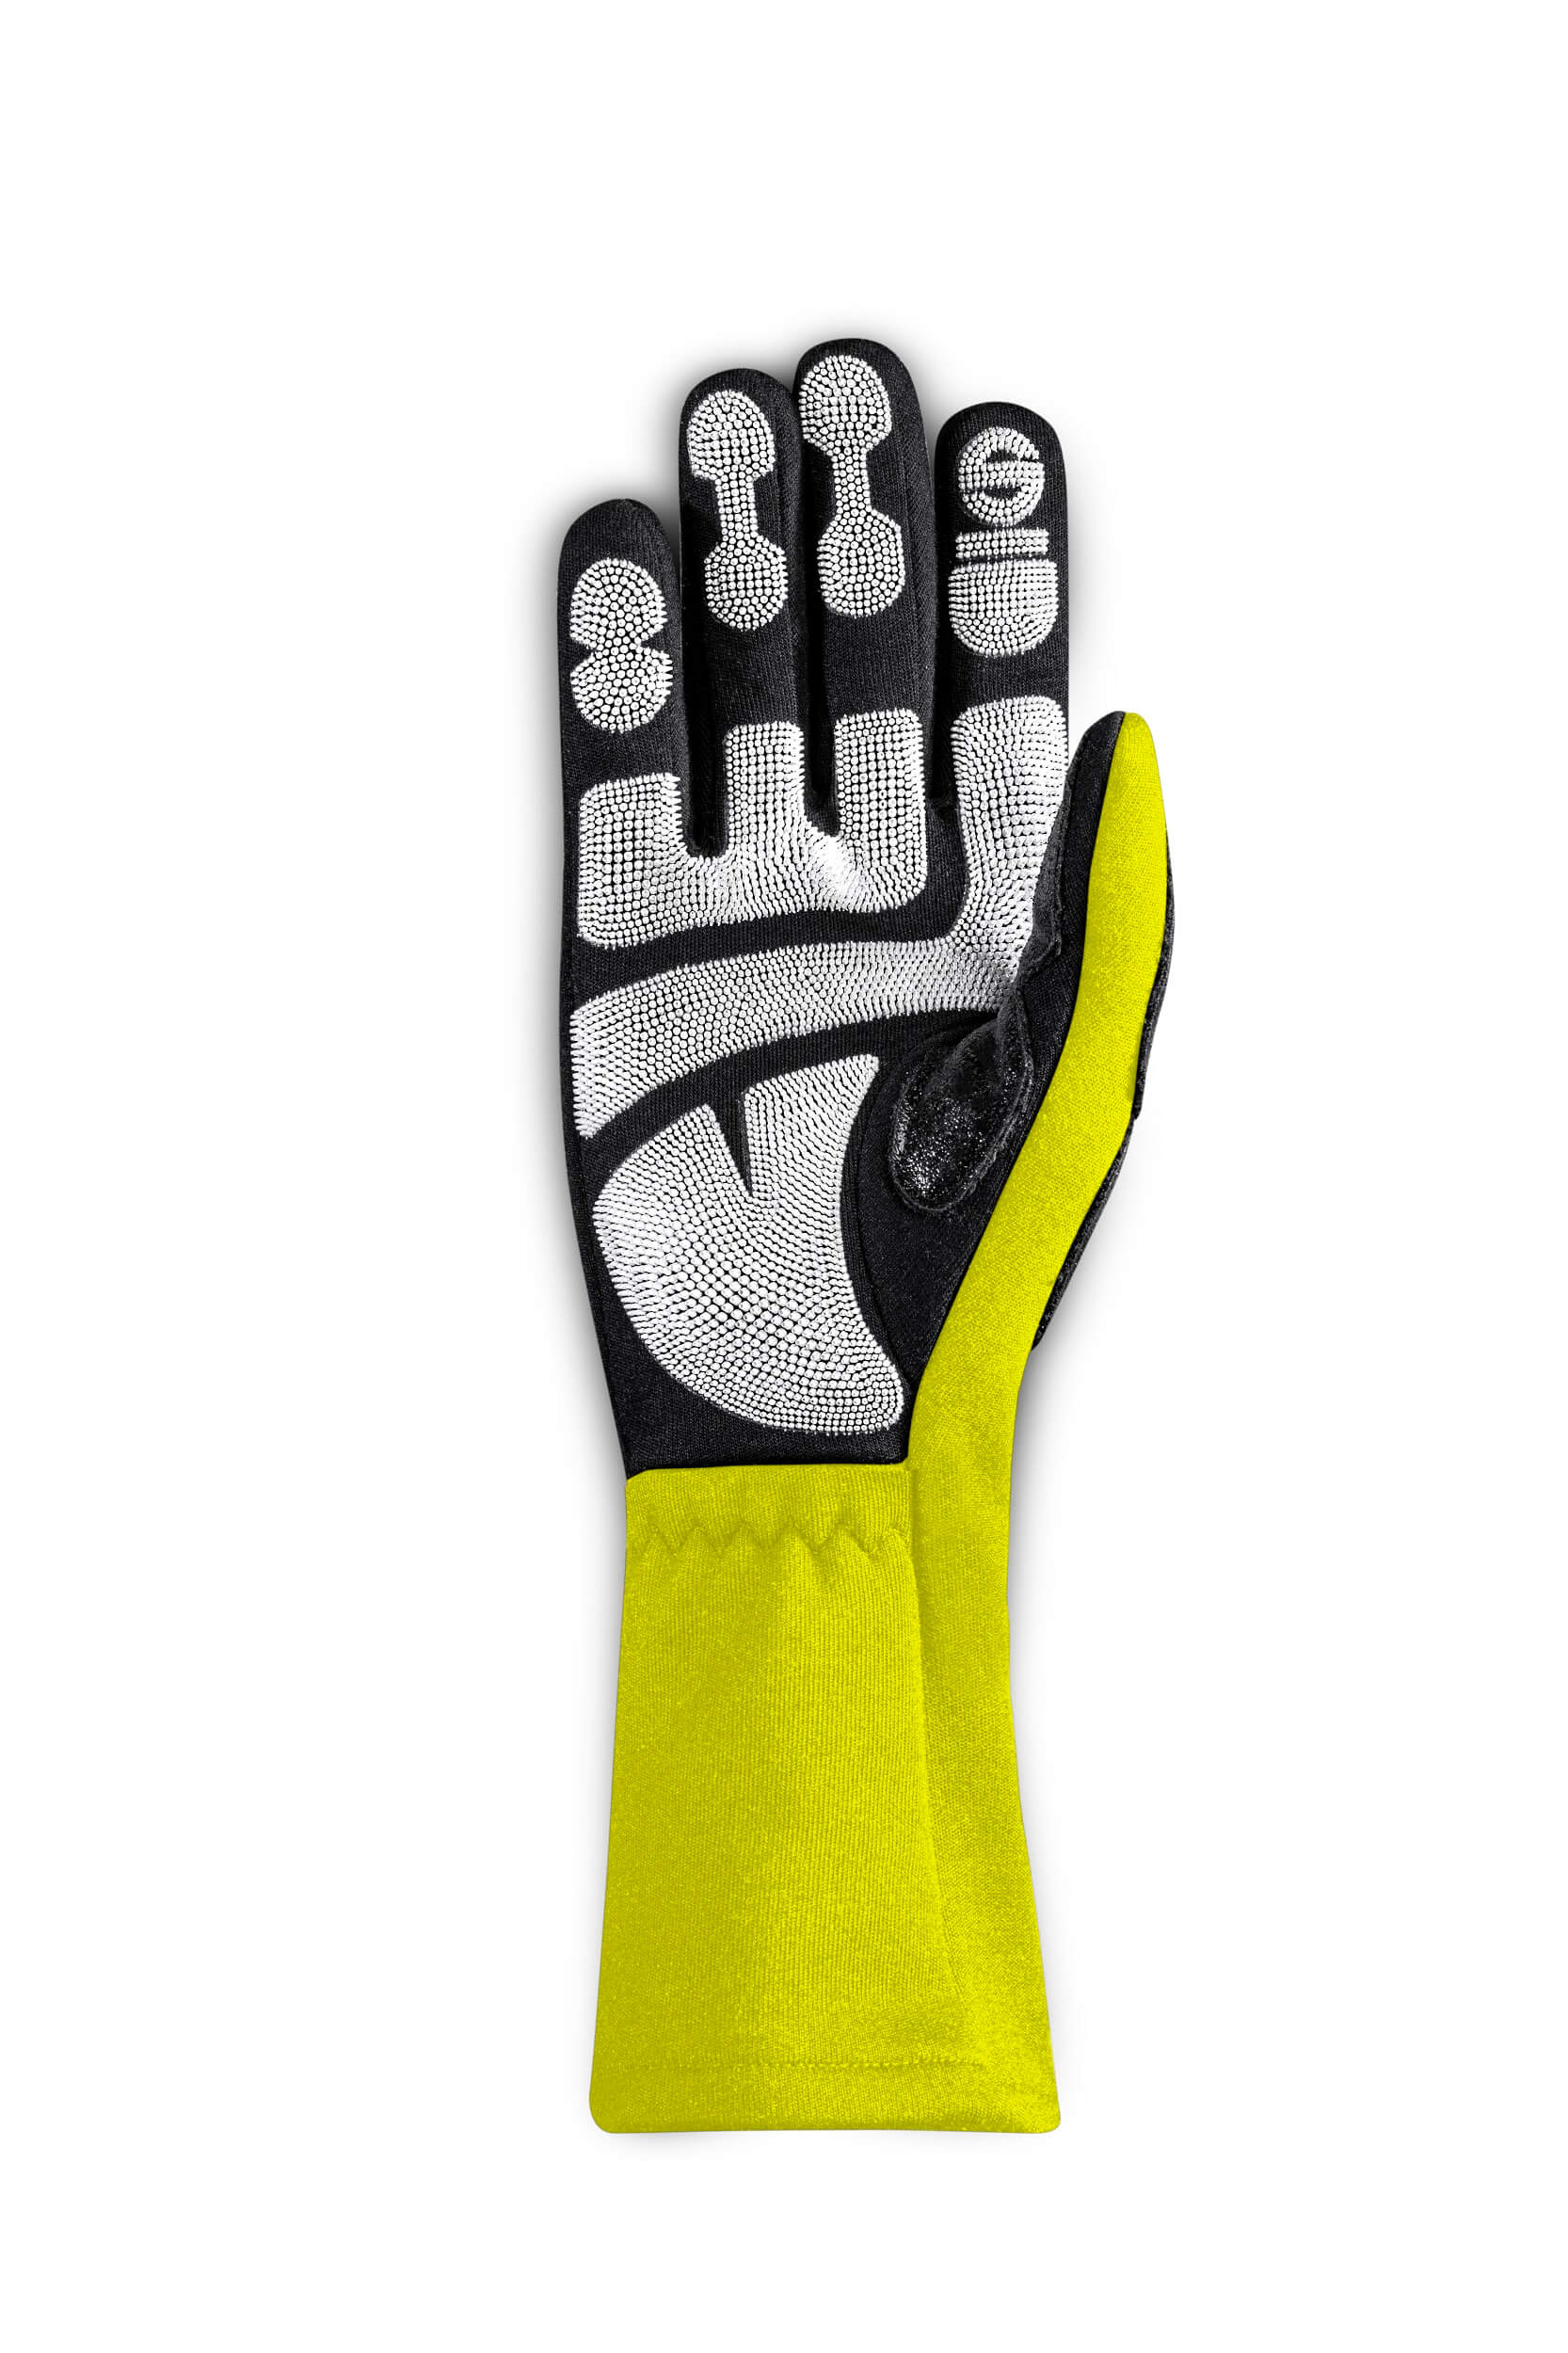 SPARCO 00131811GF TIDE MECA Gloves, NOT FIA, yellow, size 11 Photo-1 